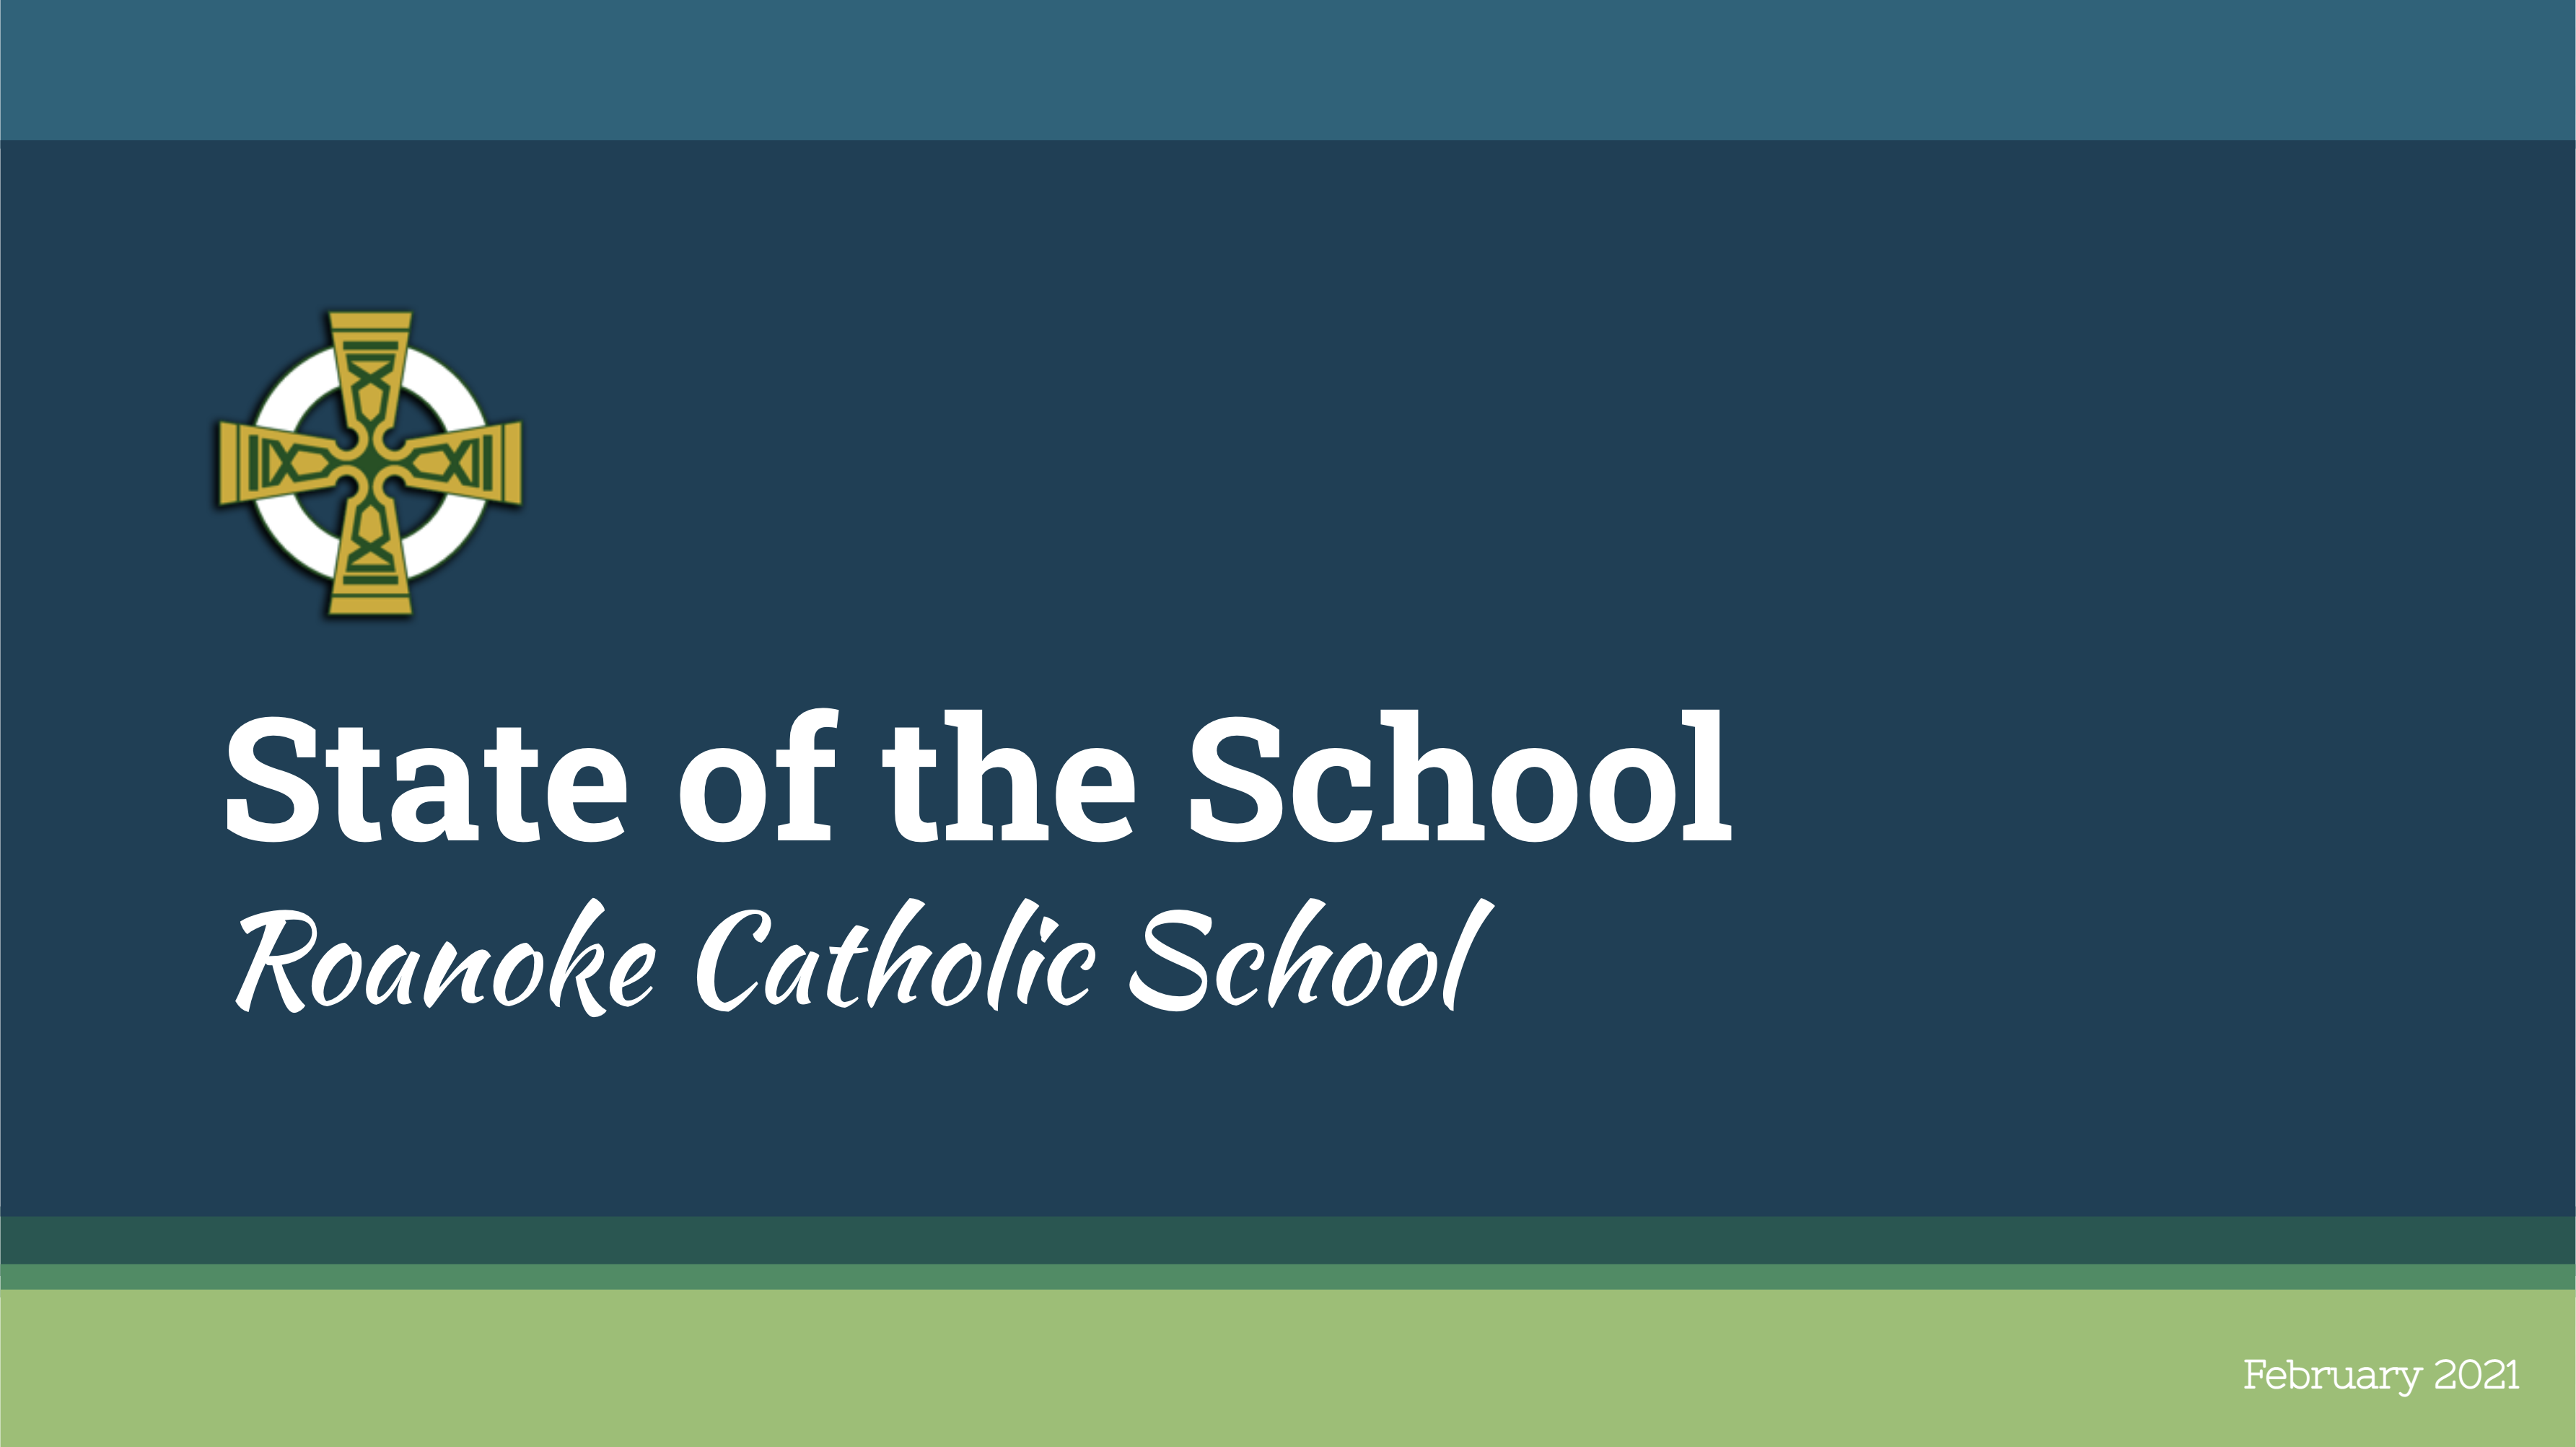 State of the School Address – February 2, 2021